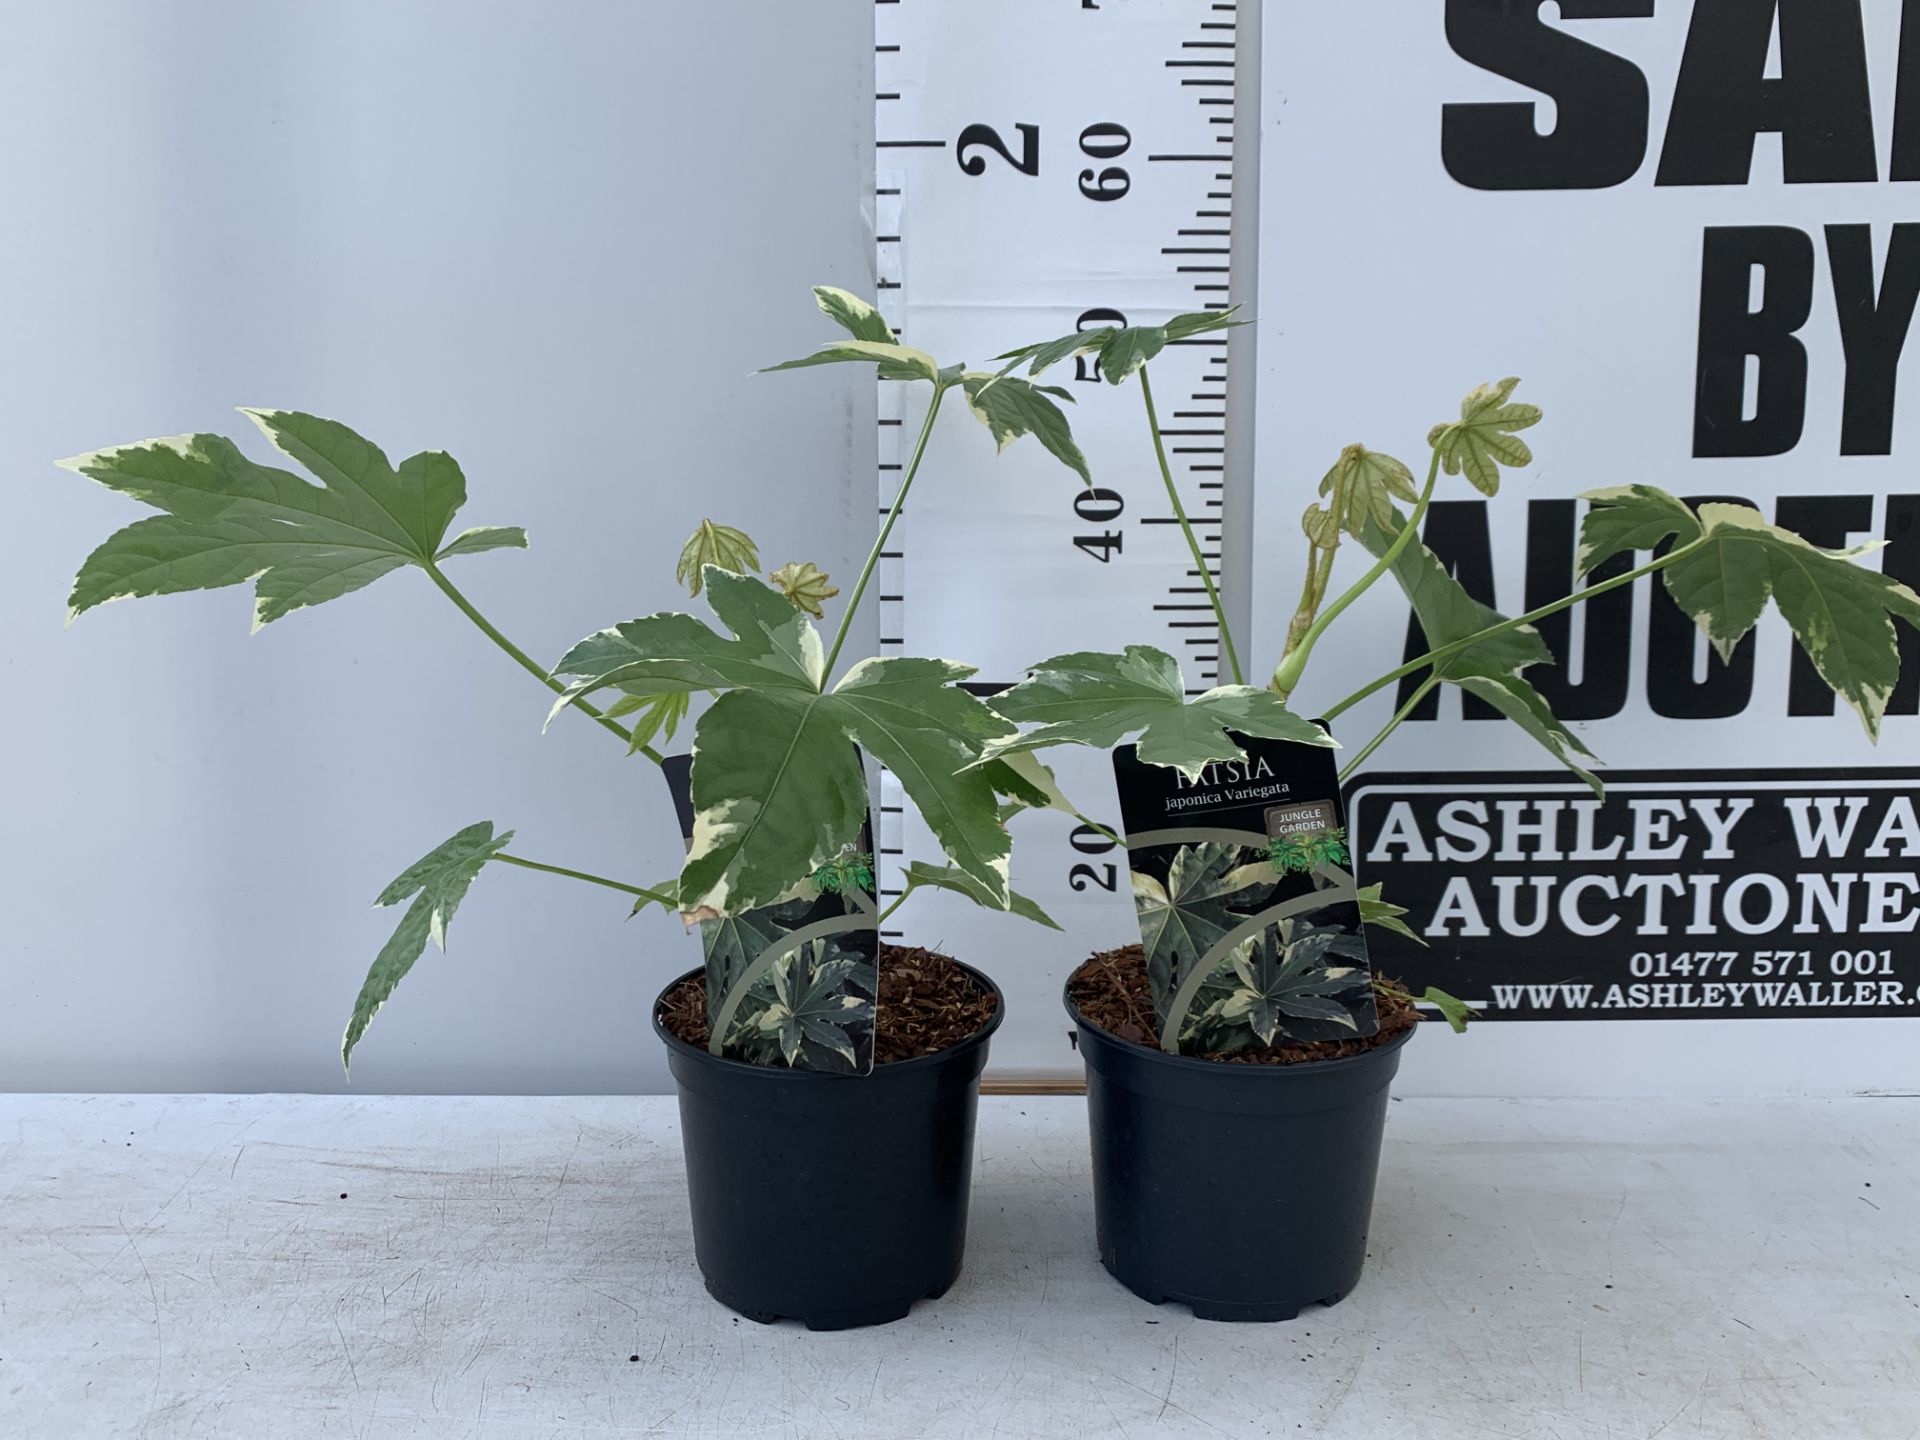 TWO FATSIA JUNGLE GARDEN JAPONICA VARIEGATA IN 2 LTR POTS 50CM TALL PLUS VAT TO BE SOLD FOR THE TWO